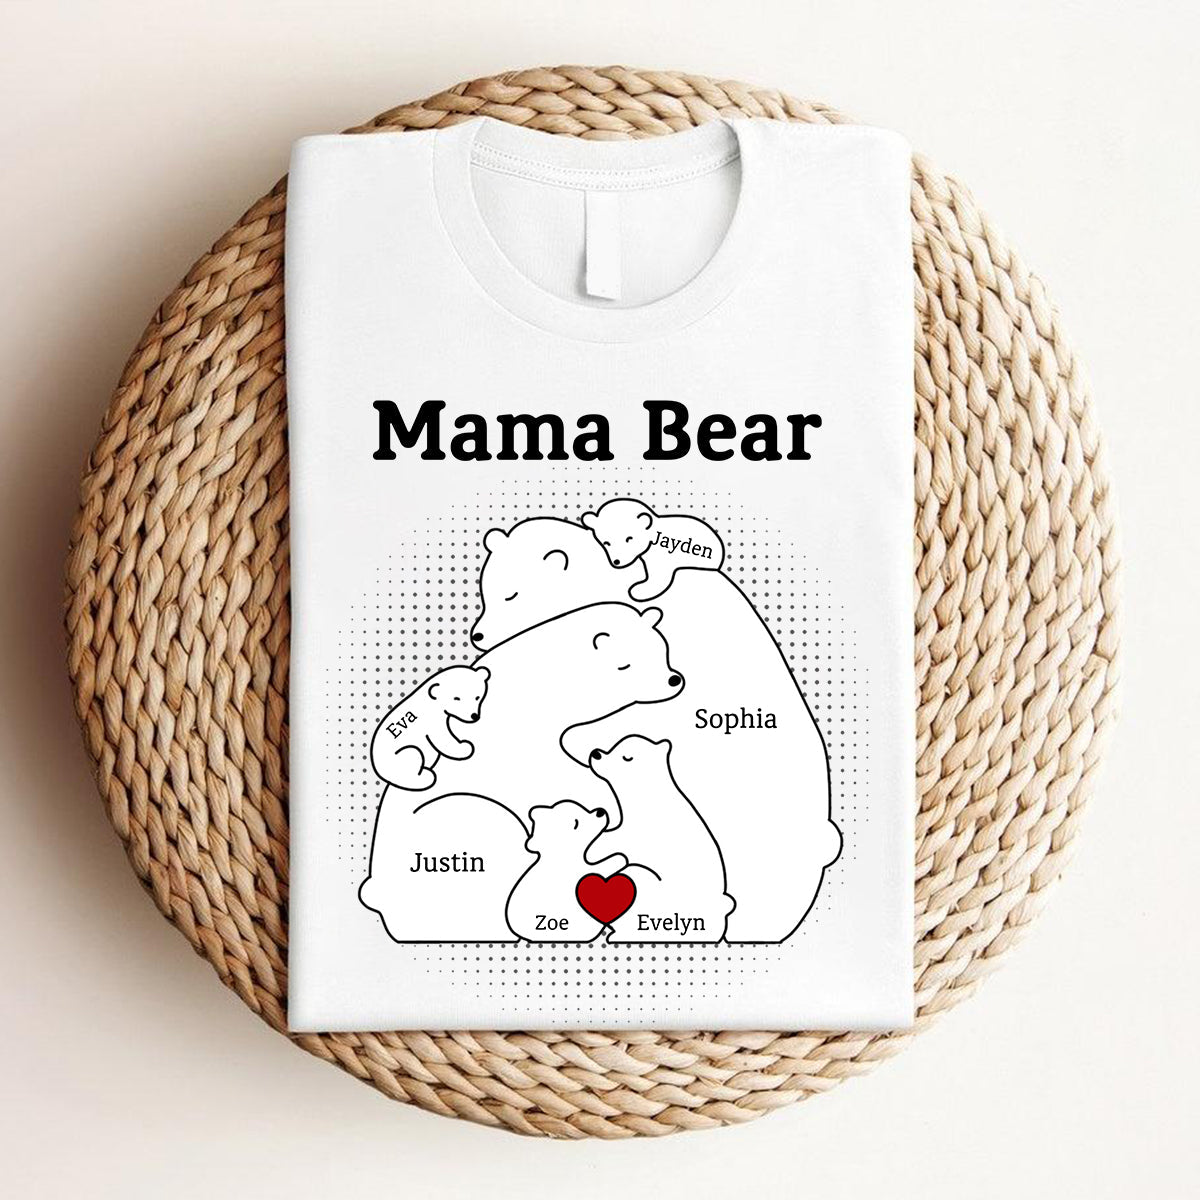 Personalized Bear Family Bear Mama Mother Pure Cotton T-shirt